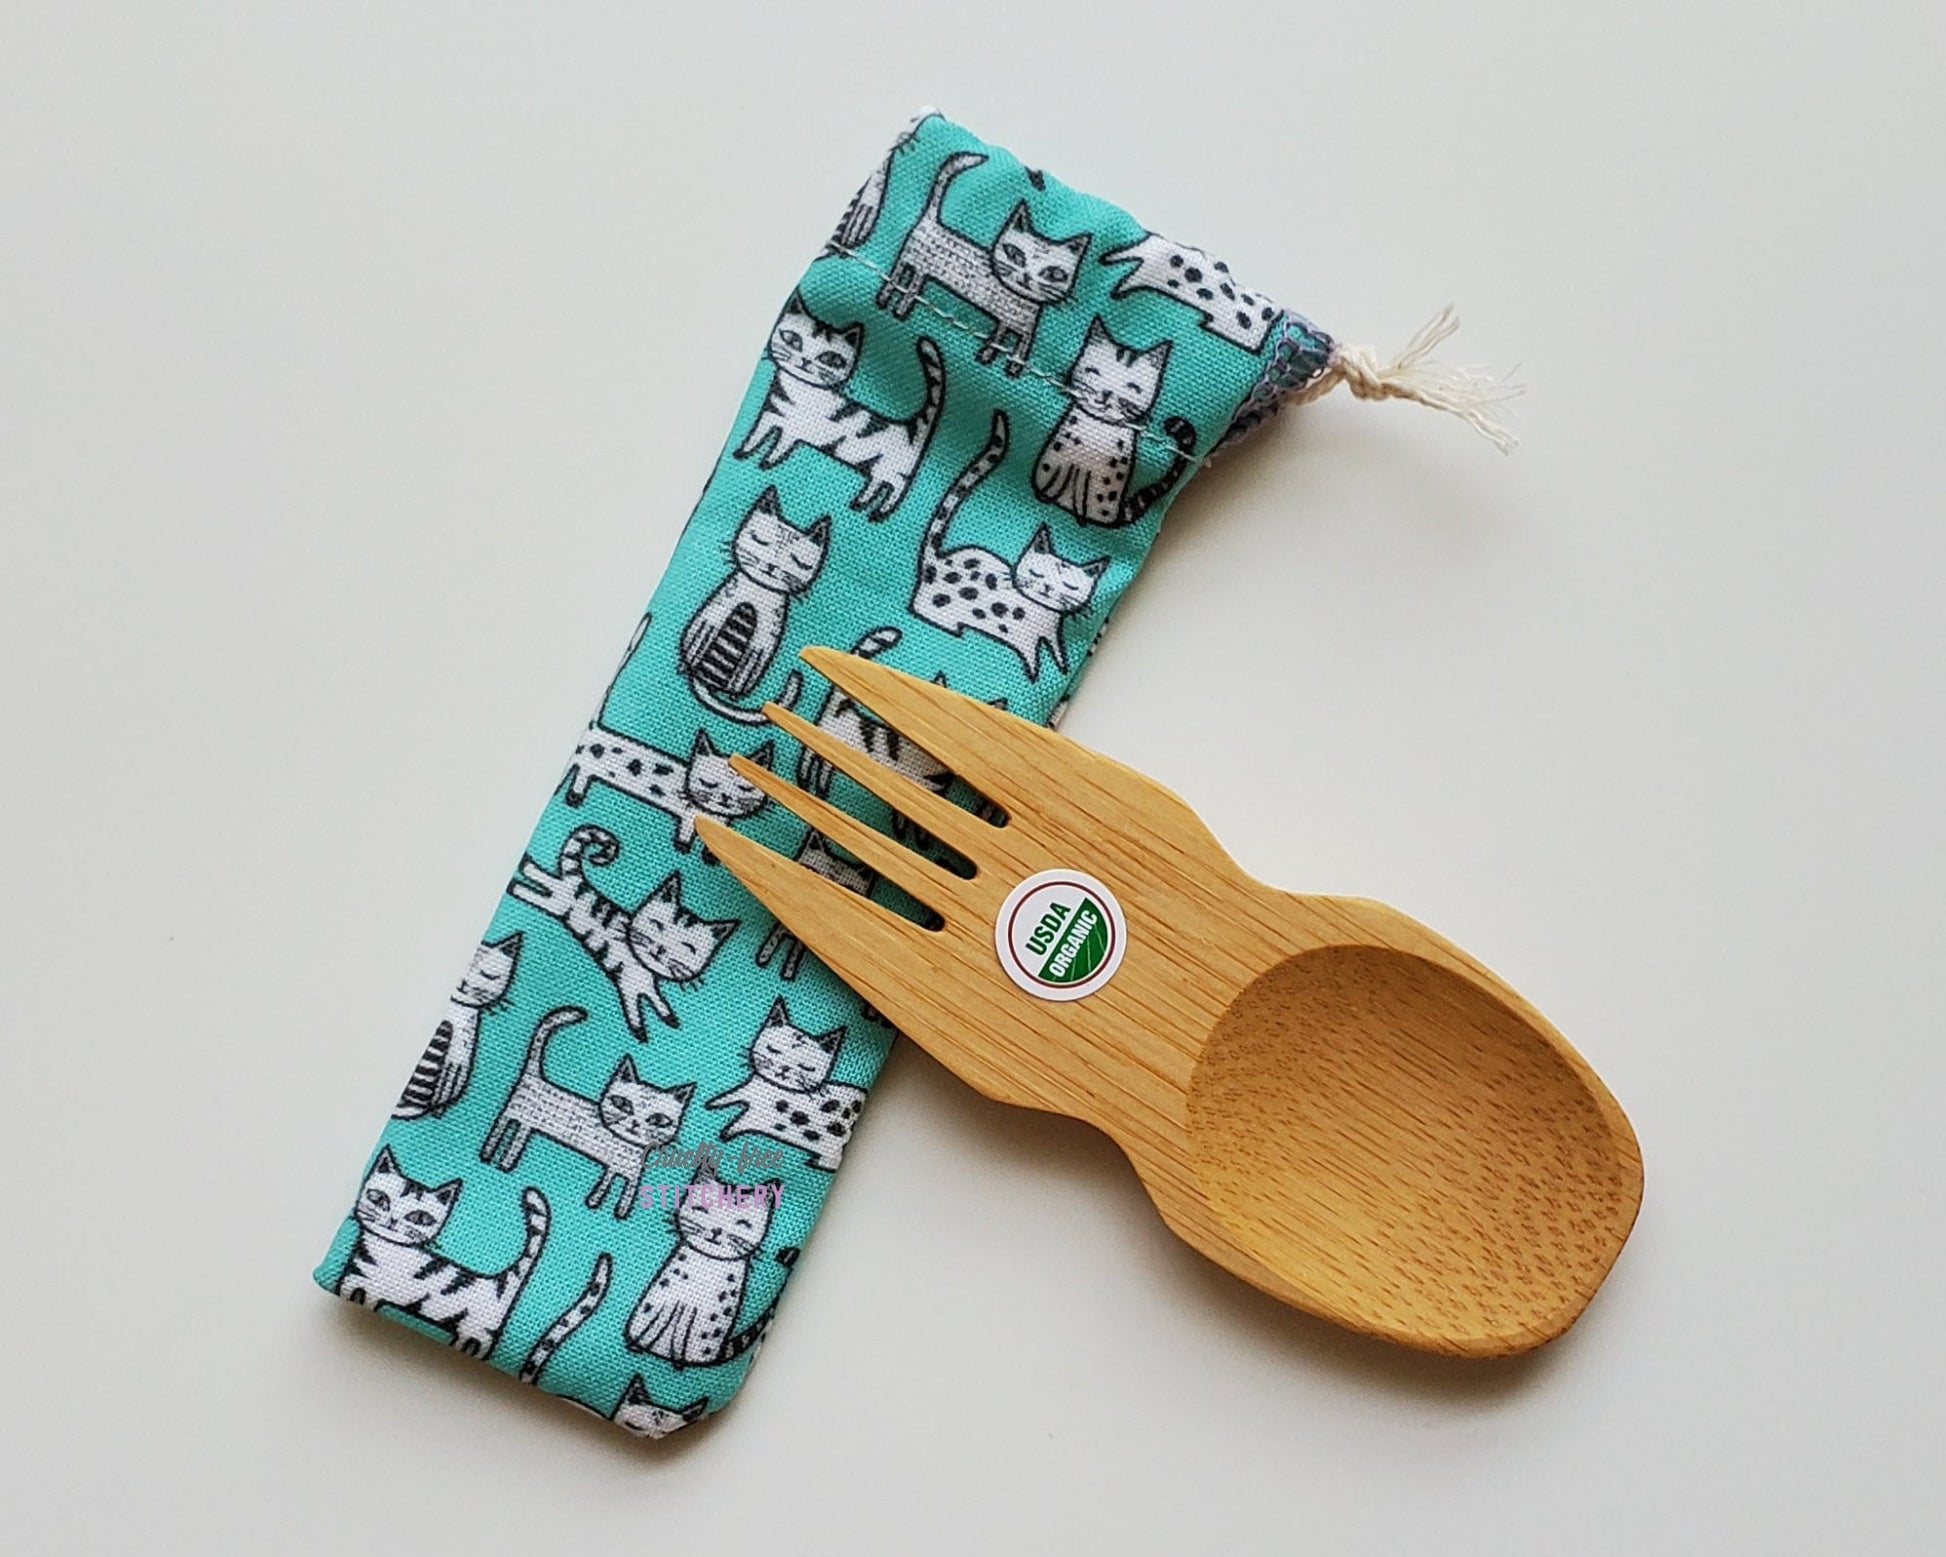 Reusable bamboo spork with pouch. The pouch is a light blue fabric with tiny black and white cats. The pouch is sitting diagonally with the spork partially on top pointing the other way. The spork is small, a double ended fork and spoon.